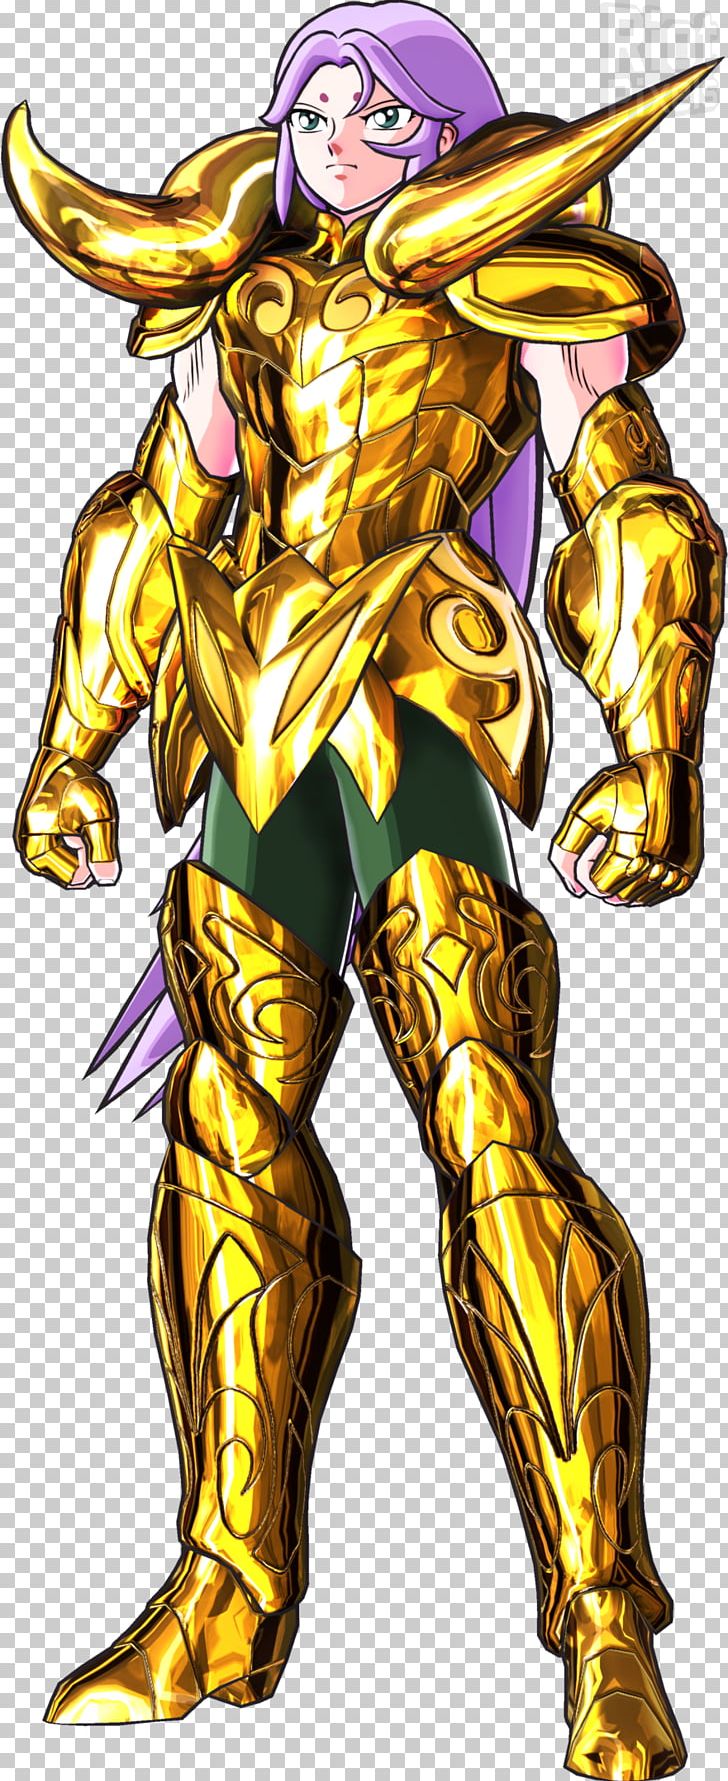 Aries Mu Saint Seiya: Soldiers' Soul Pegasus Seiya Saint Seiya: Brave Soldiers Saint Seiya: Knights Of The Zodiac PNG, Clipart, Anime, Aries Mu, Aries Shion, Fictional Character, Mythical Creature Free PNG Download